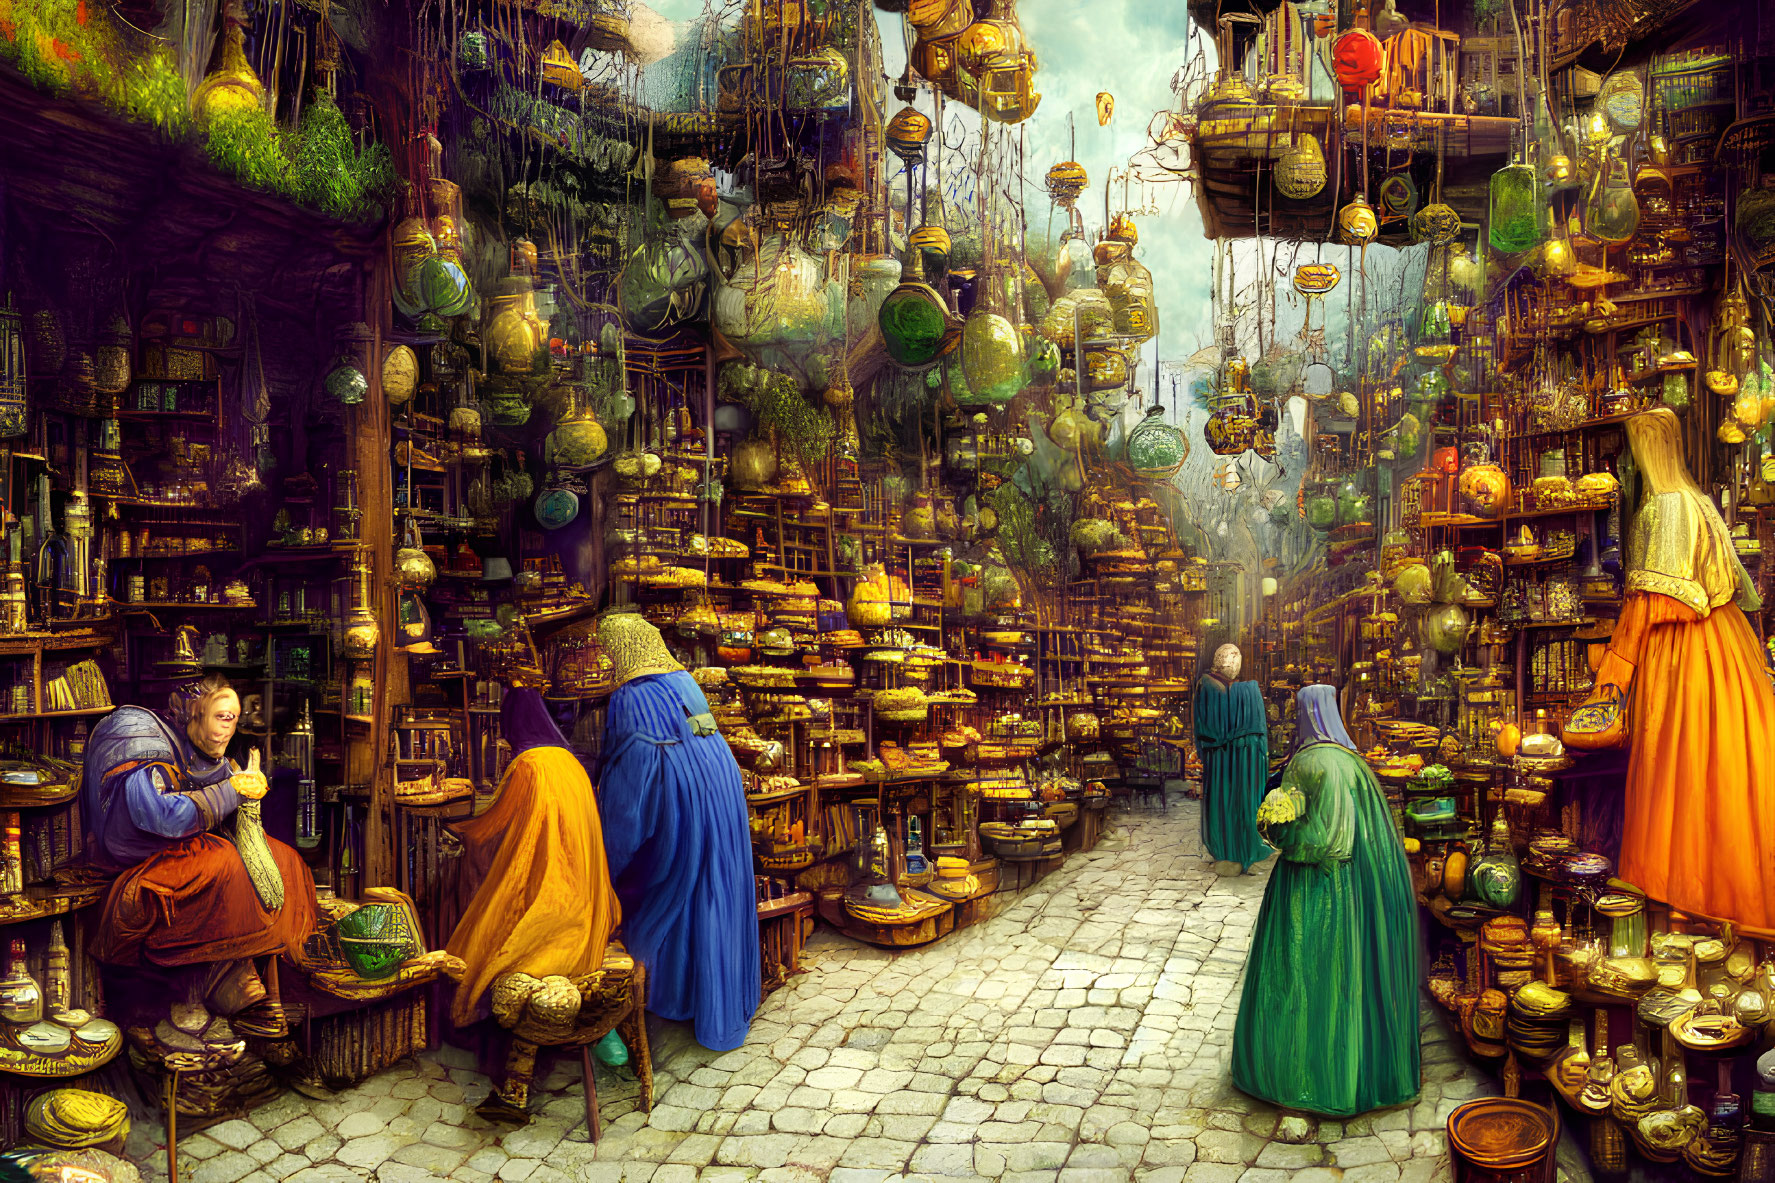 Medieval marketplace with colorful merchants, pottery, plants, and lanterns